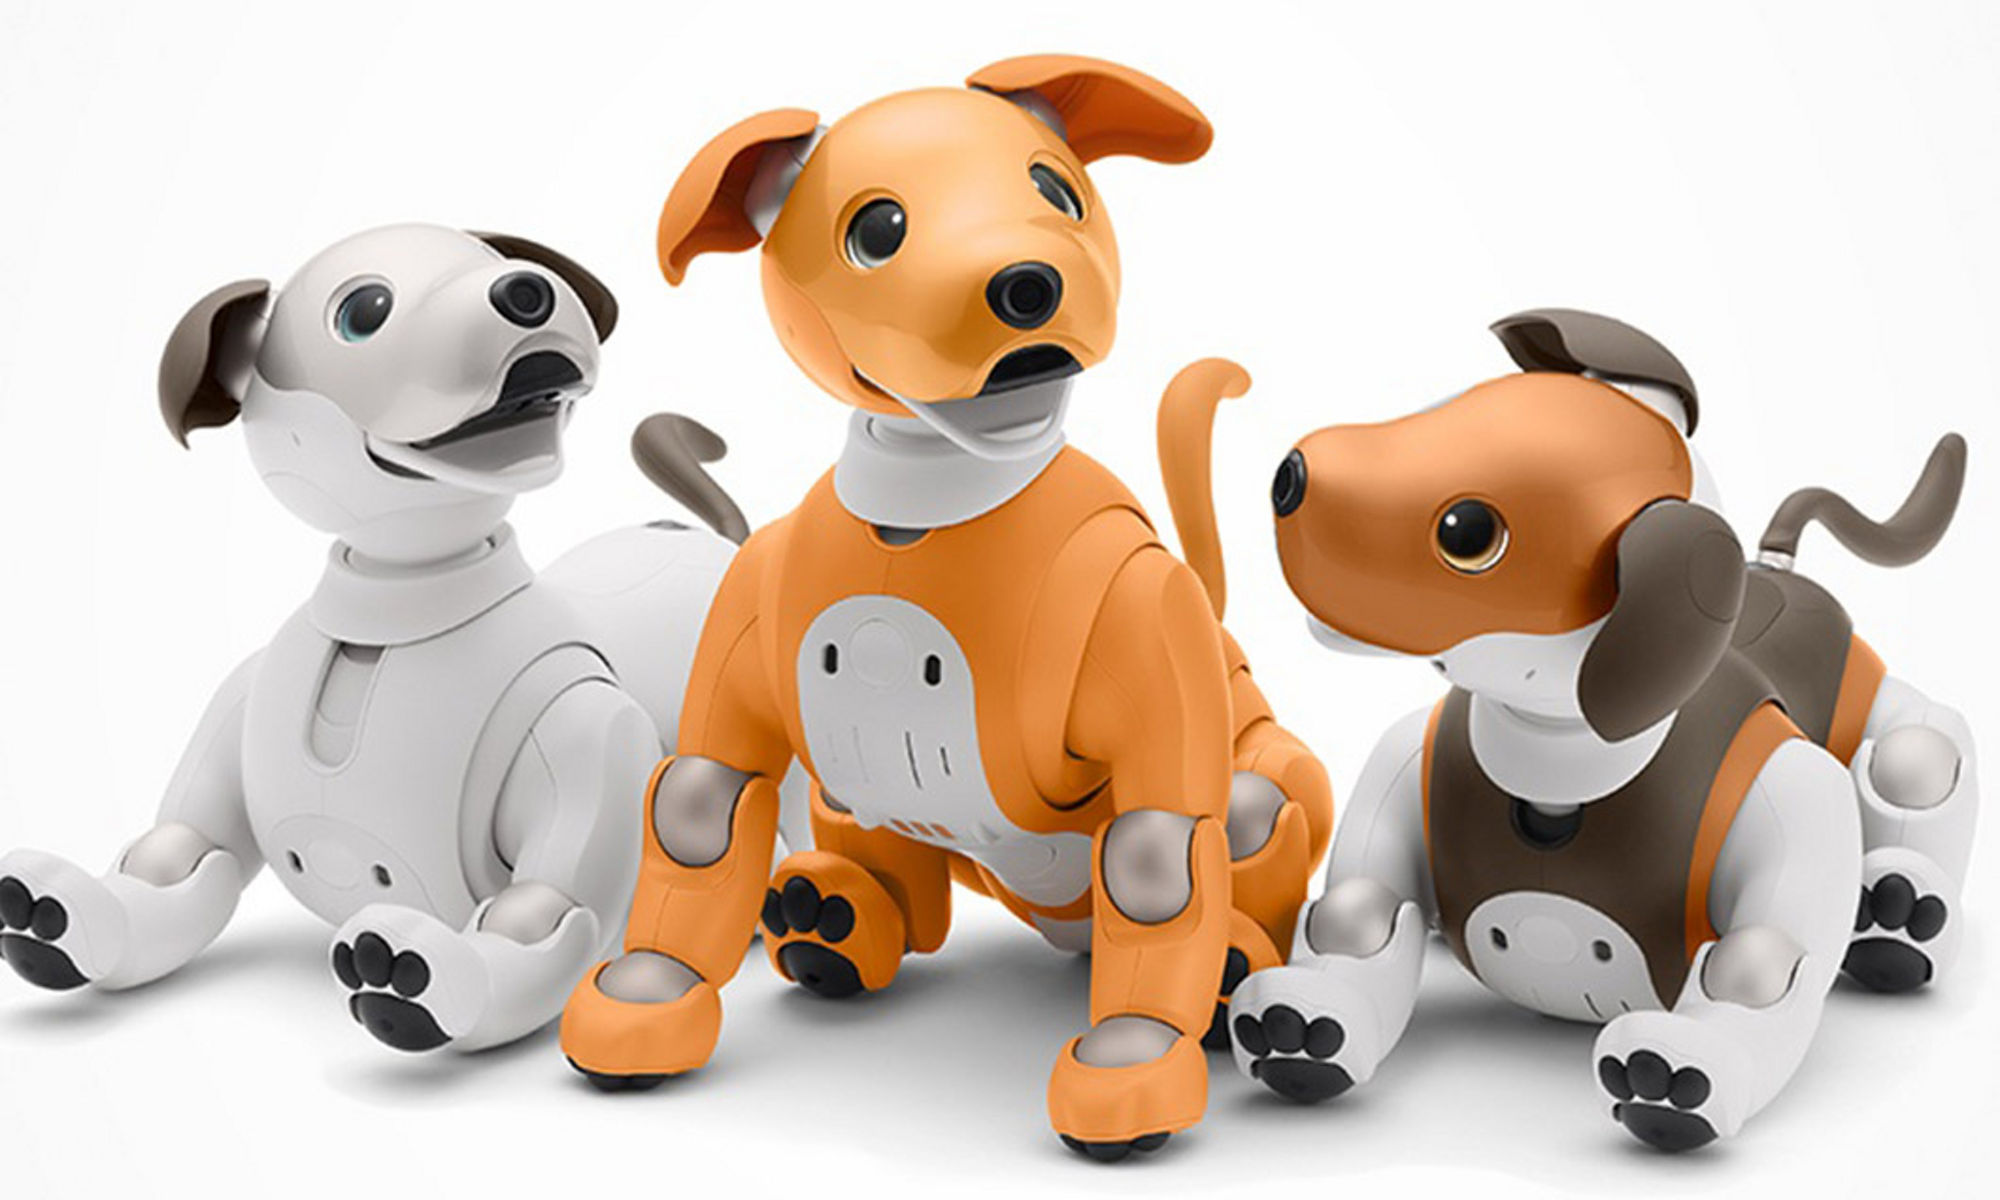 Aibo robot dogs